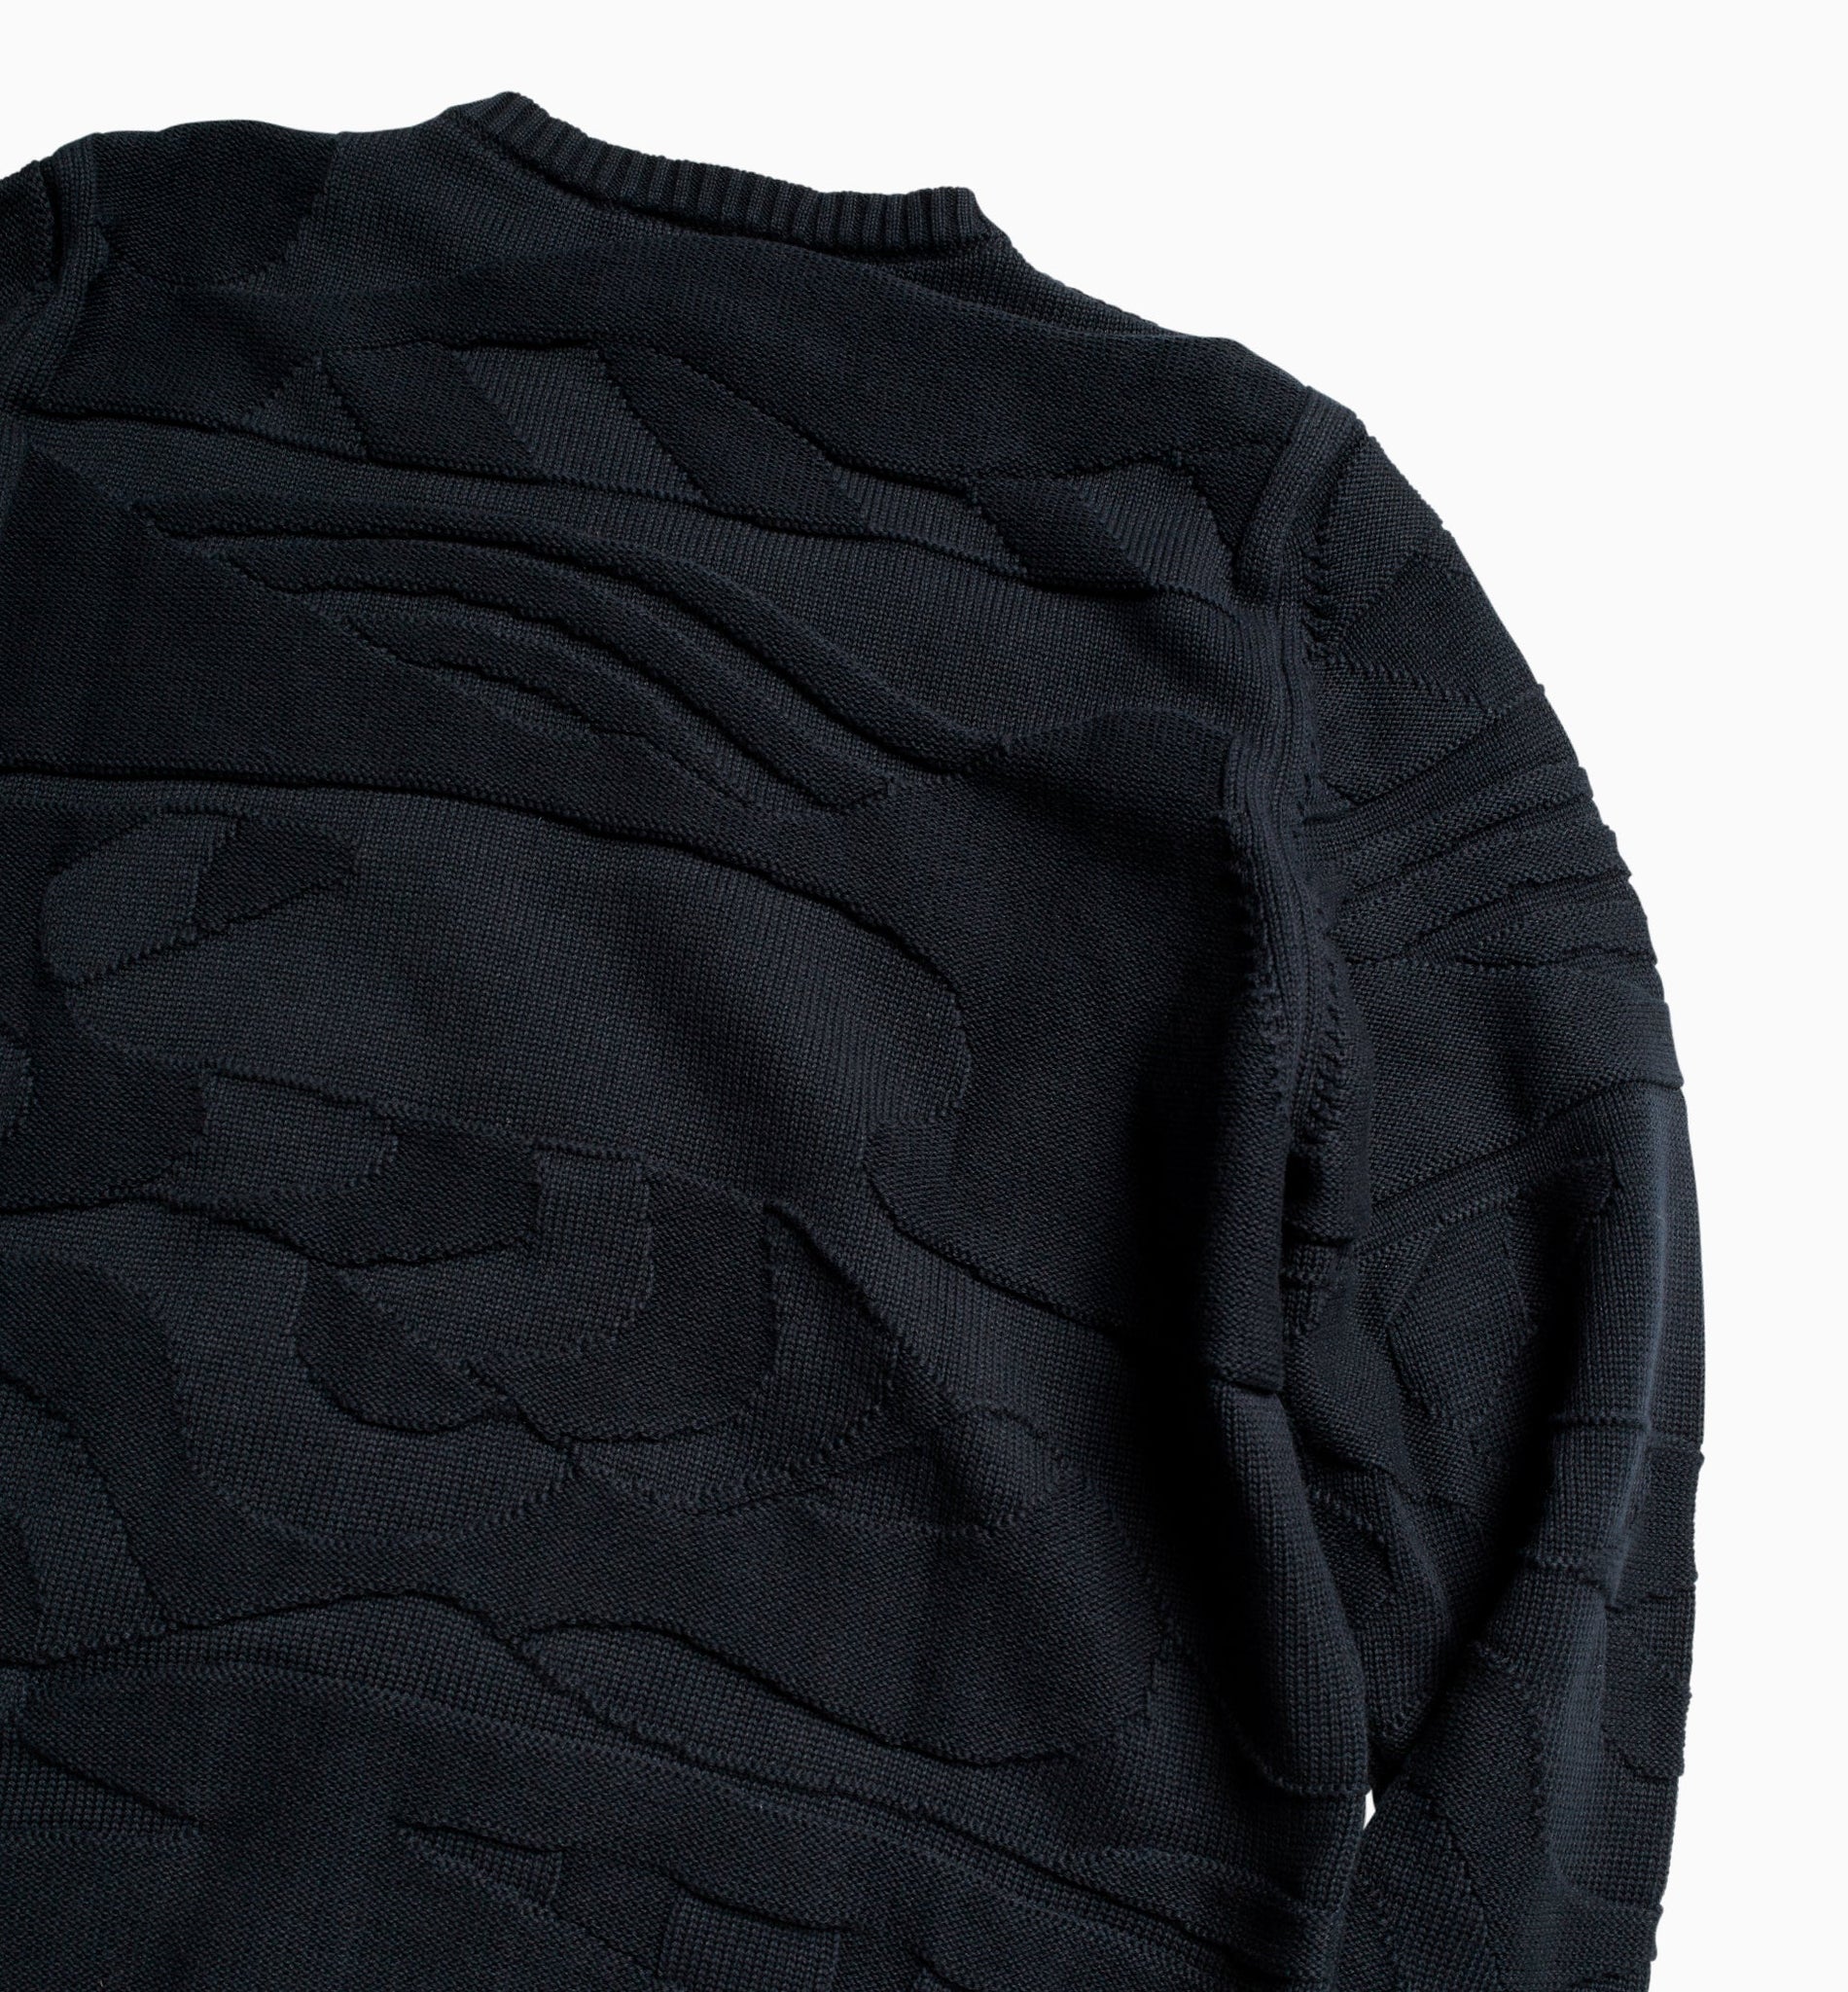 Landscaped Knitted Pullover - Navy Blue